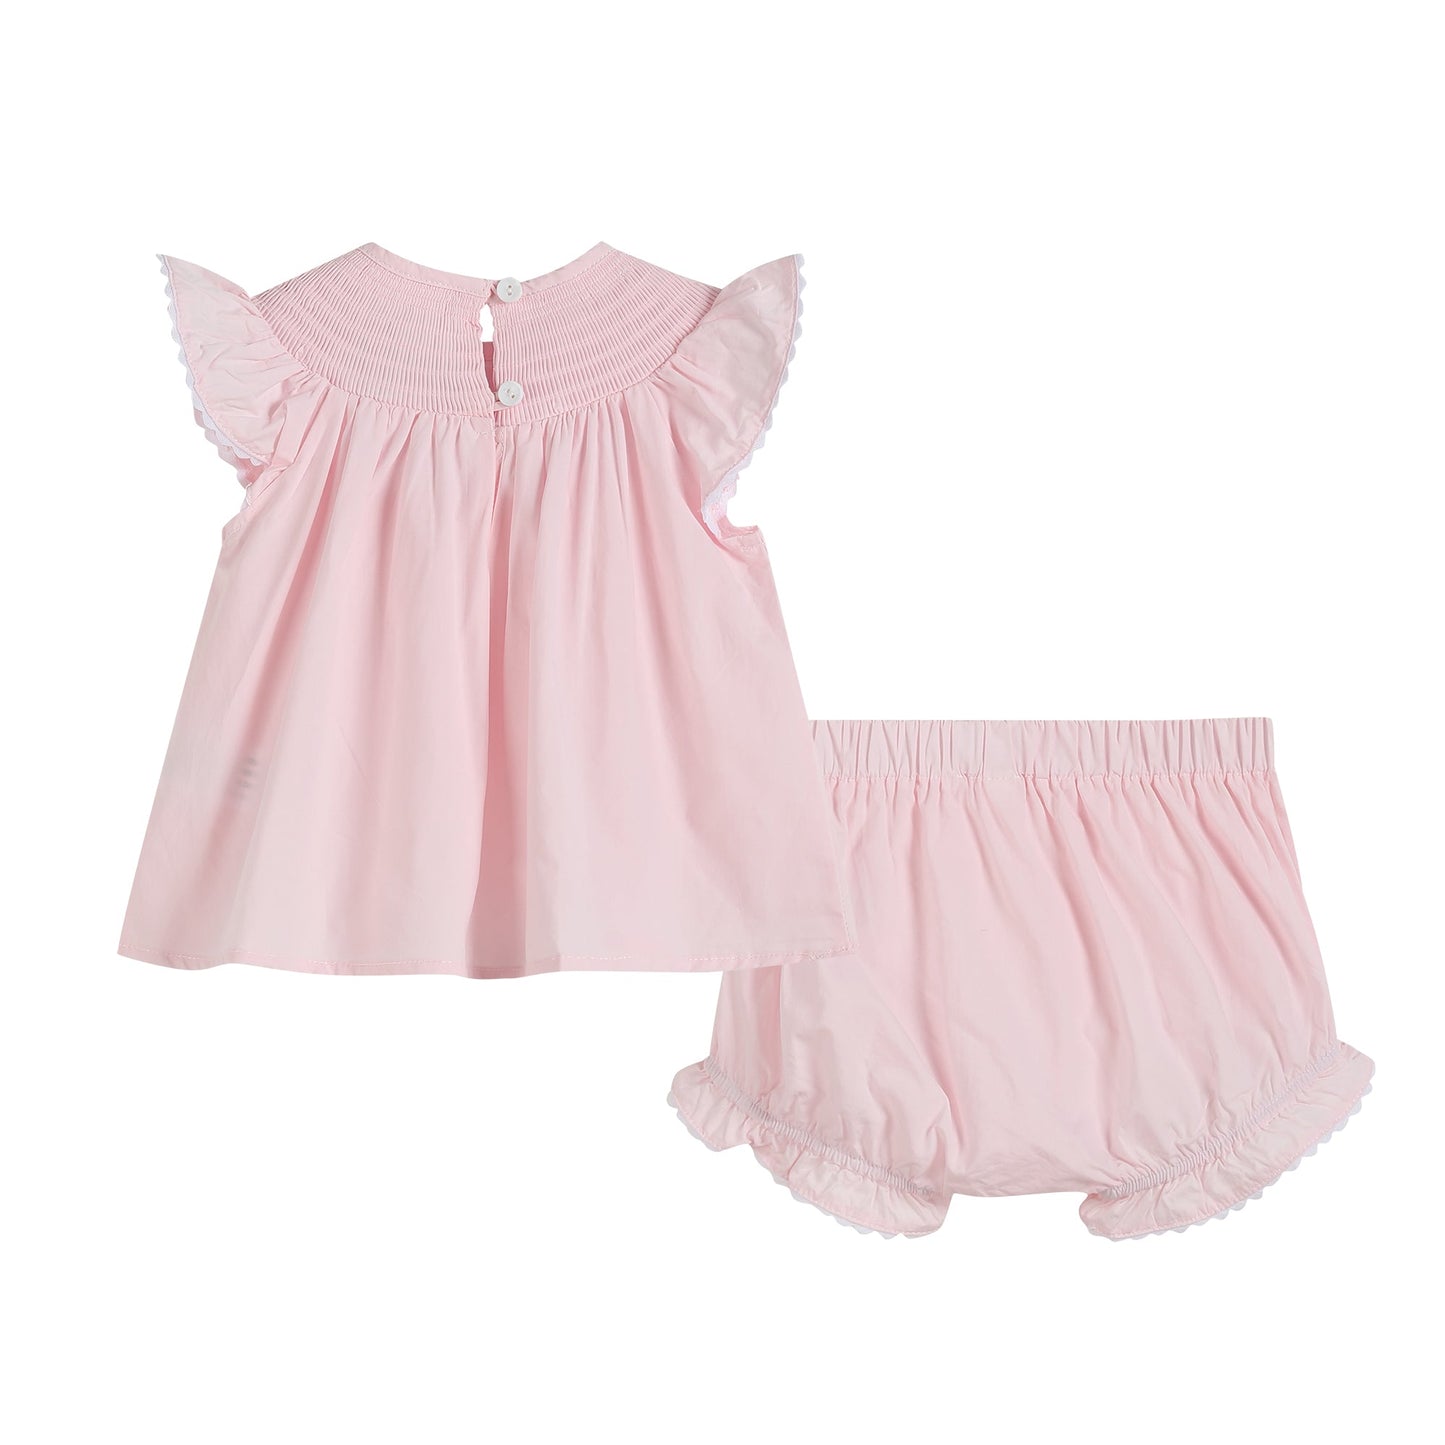 Light Pink Daisy Smocked Top and Bloomer 2 pc set